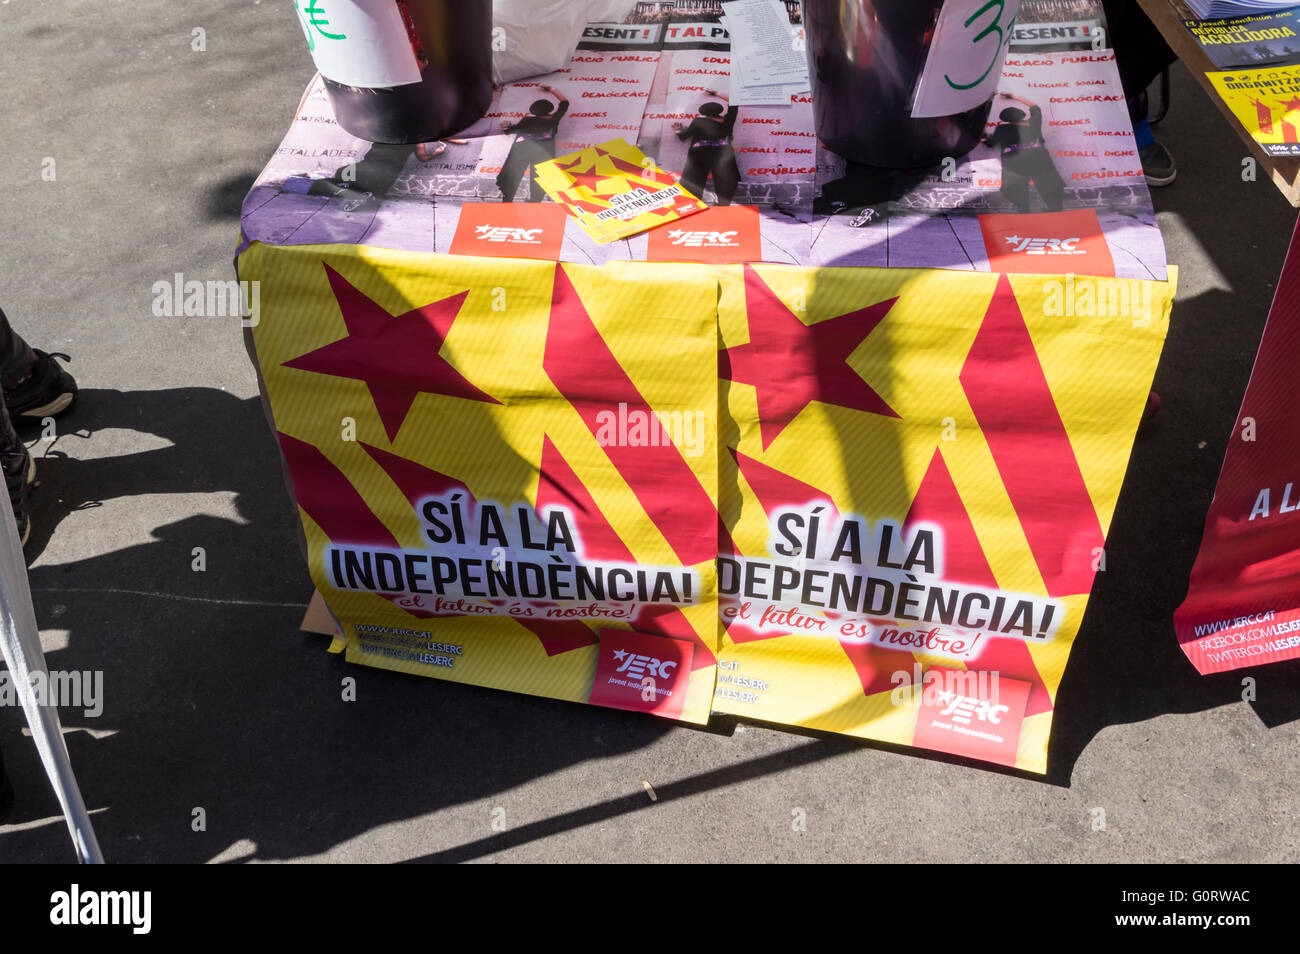 Pro-independence banner at a booth of JERC, a party supporting Catalan independence from Spain. Barcelona, 23 April 2016. Stock Photo